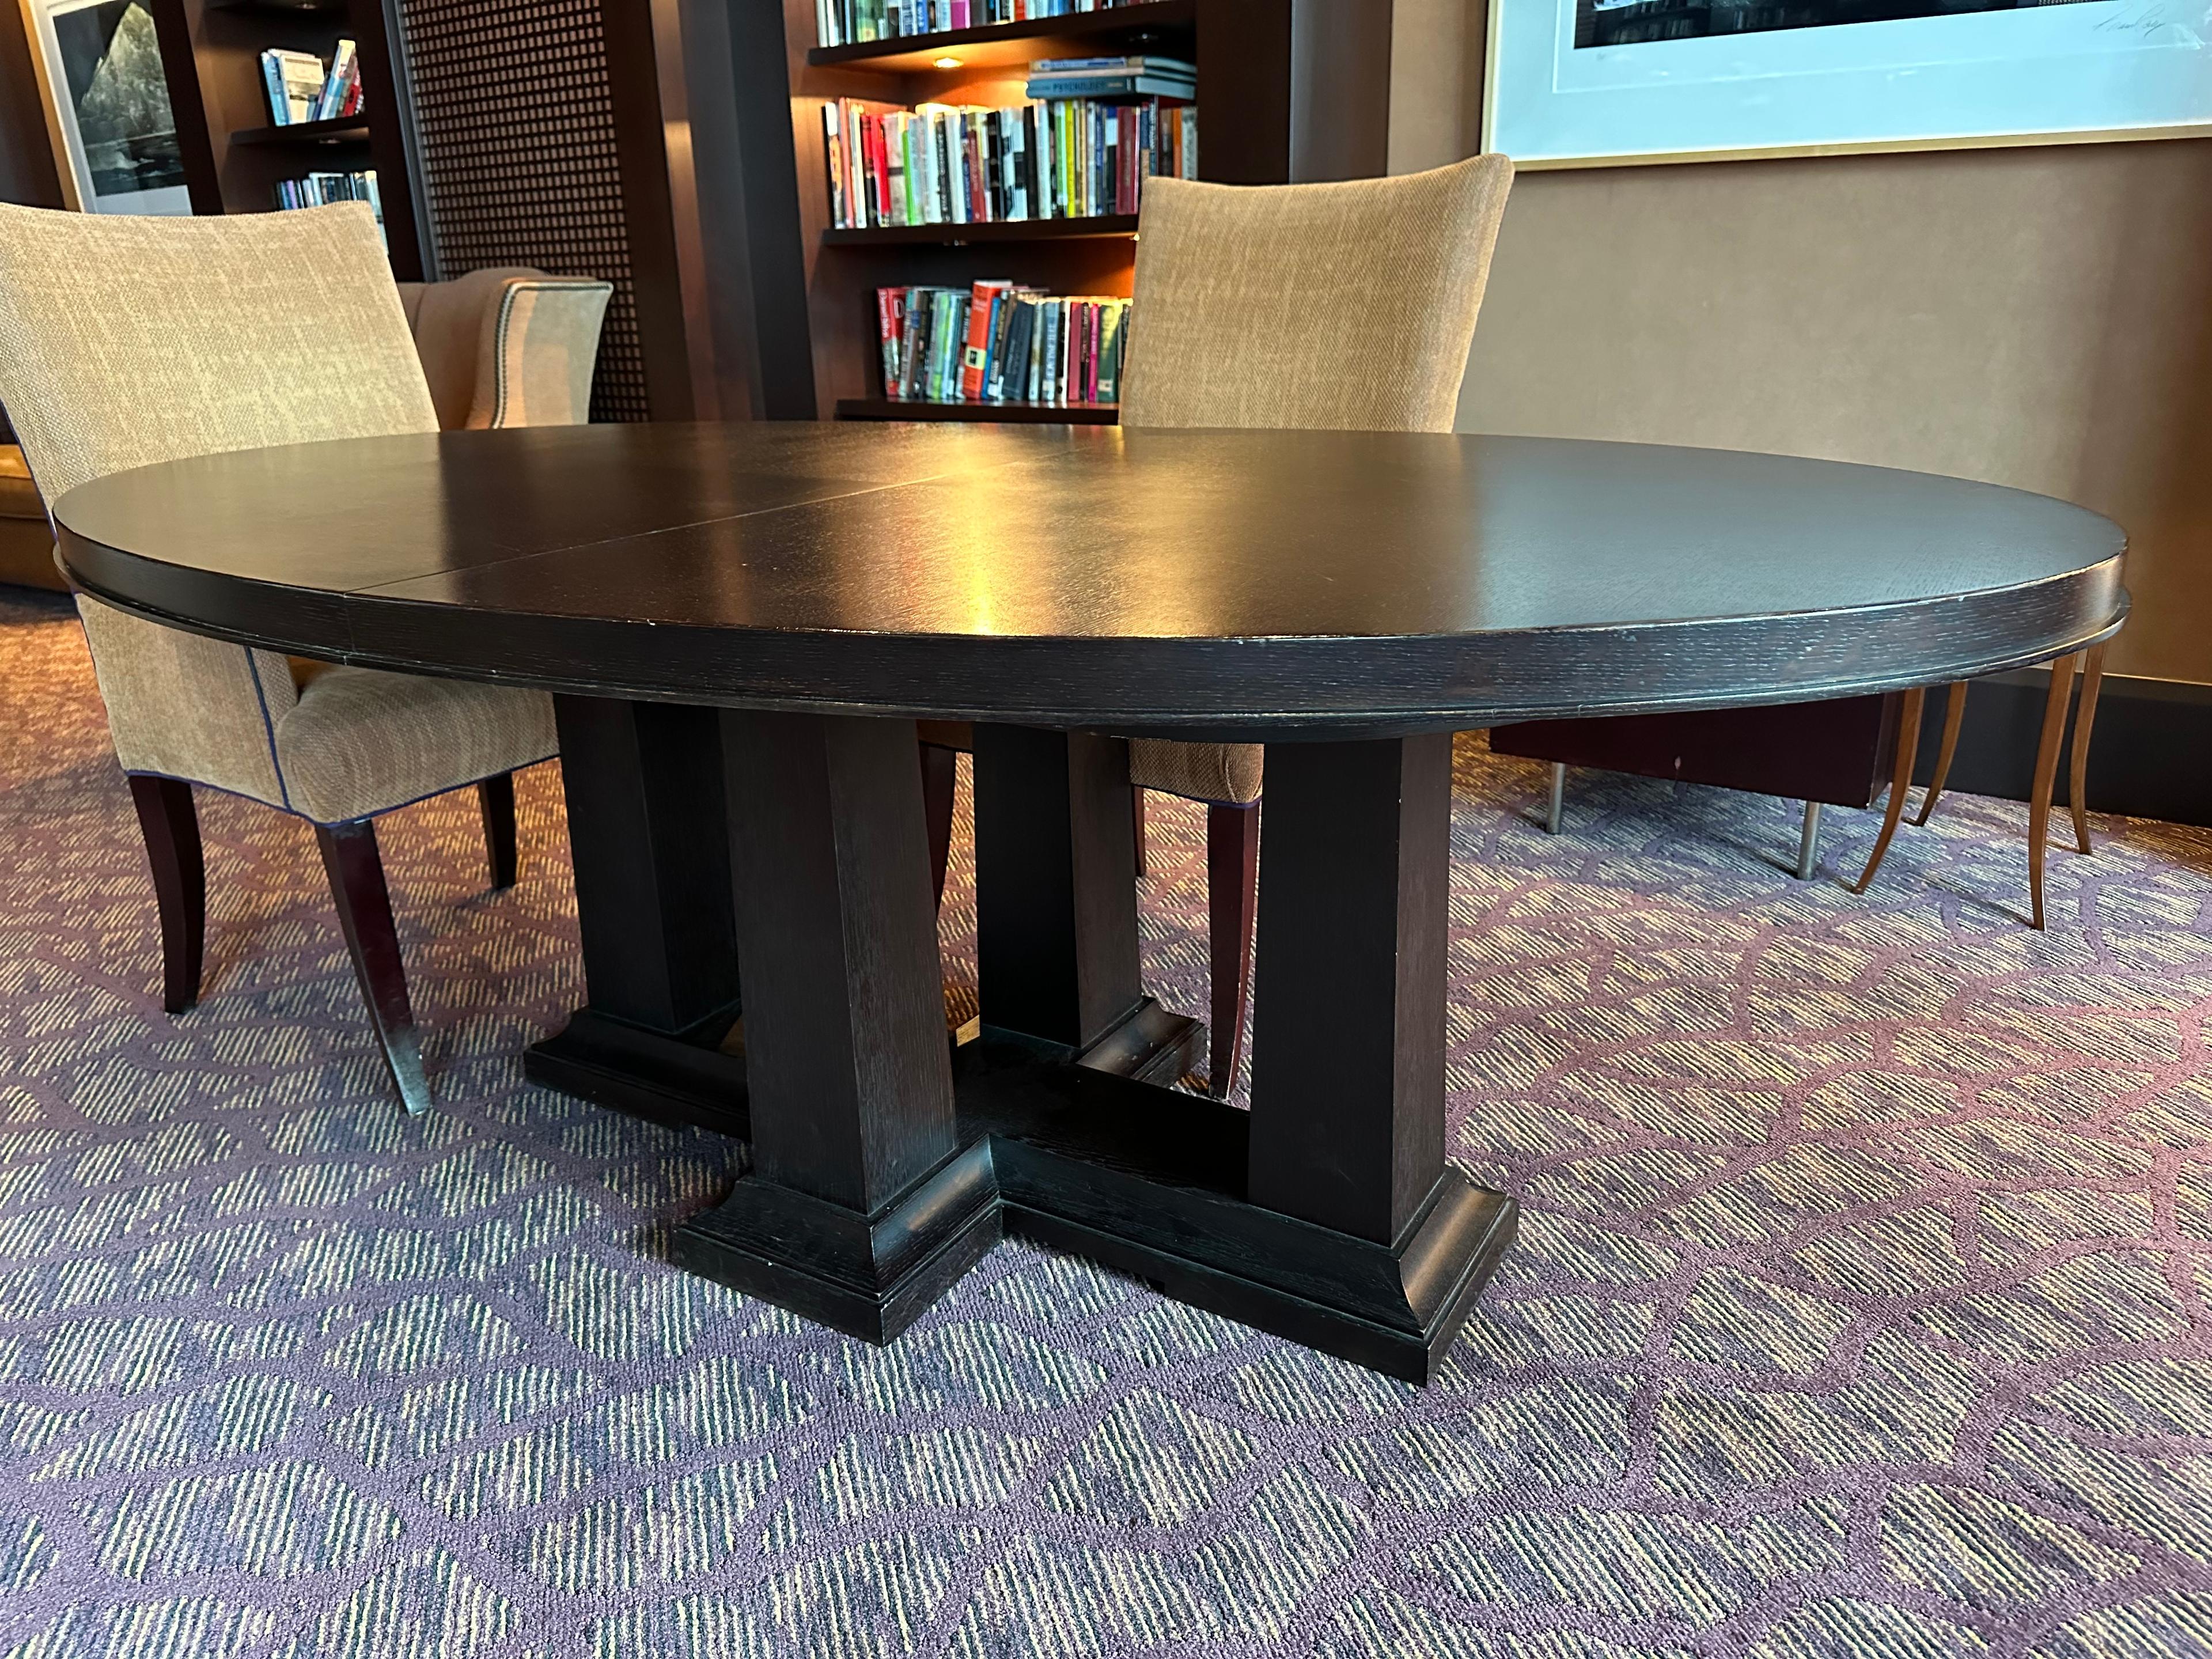 83.5"L x 49.5"W x 30.5"H Extendable Darkwood Table